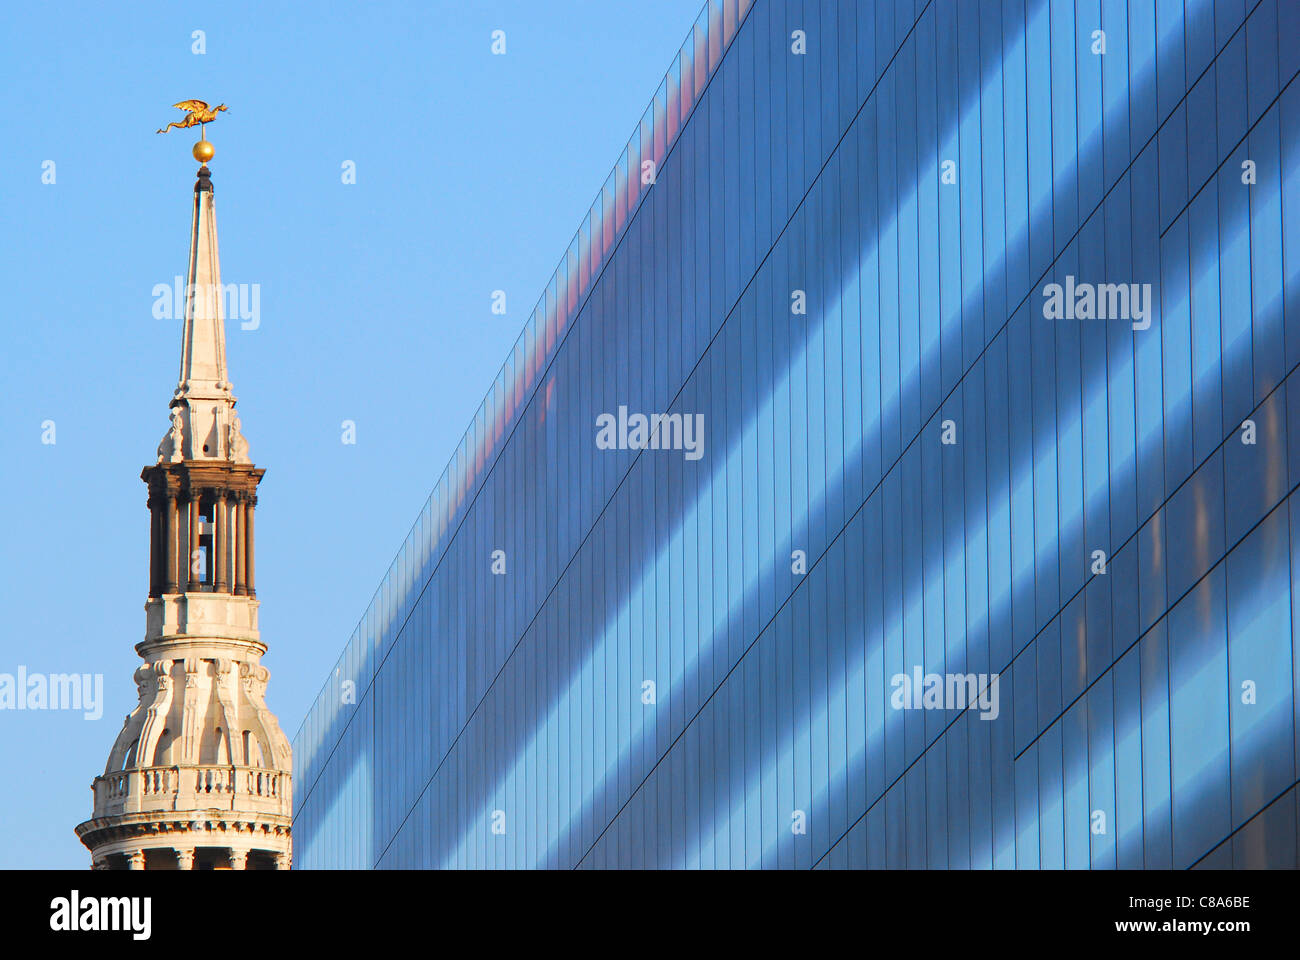 The ultra-modern architecture of One New Change building and the old spire of St. Mary-le-Bow, in Cheapside, London, UK. Stock Photo